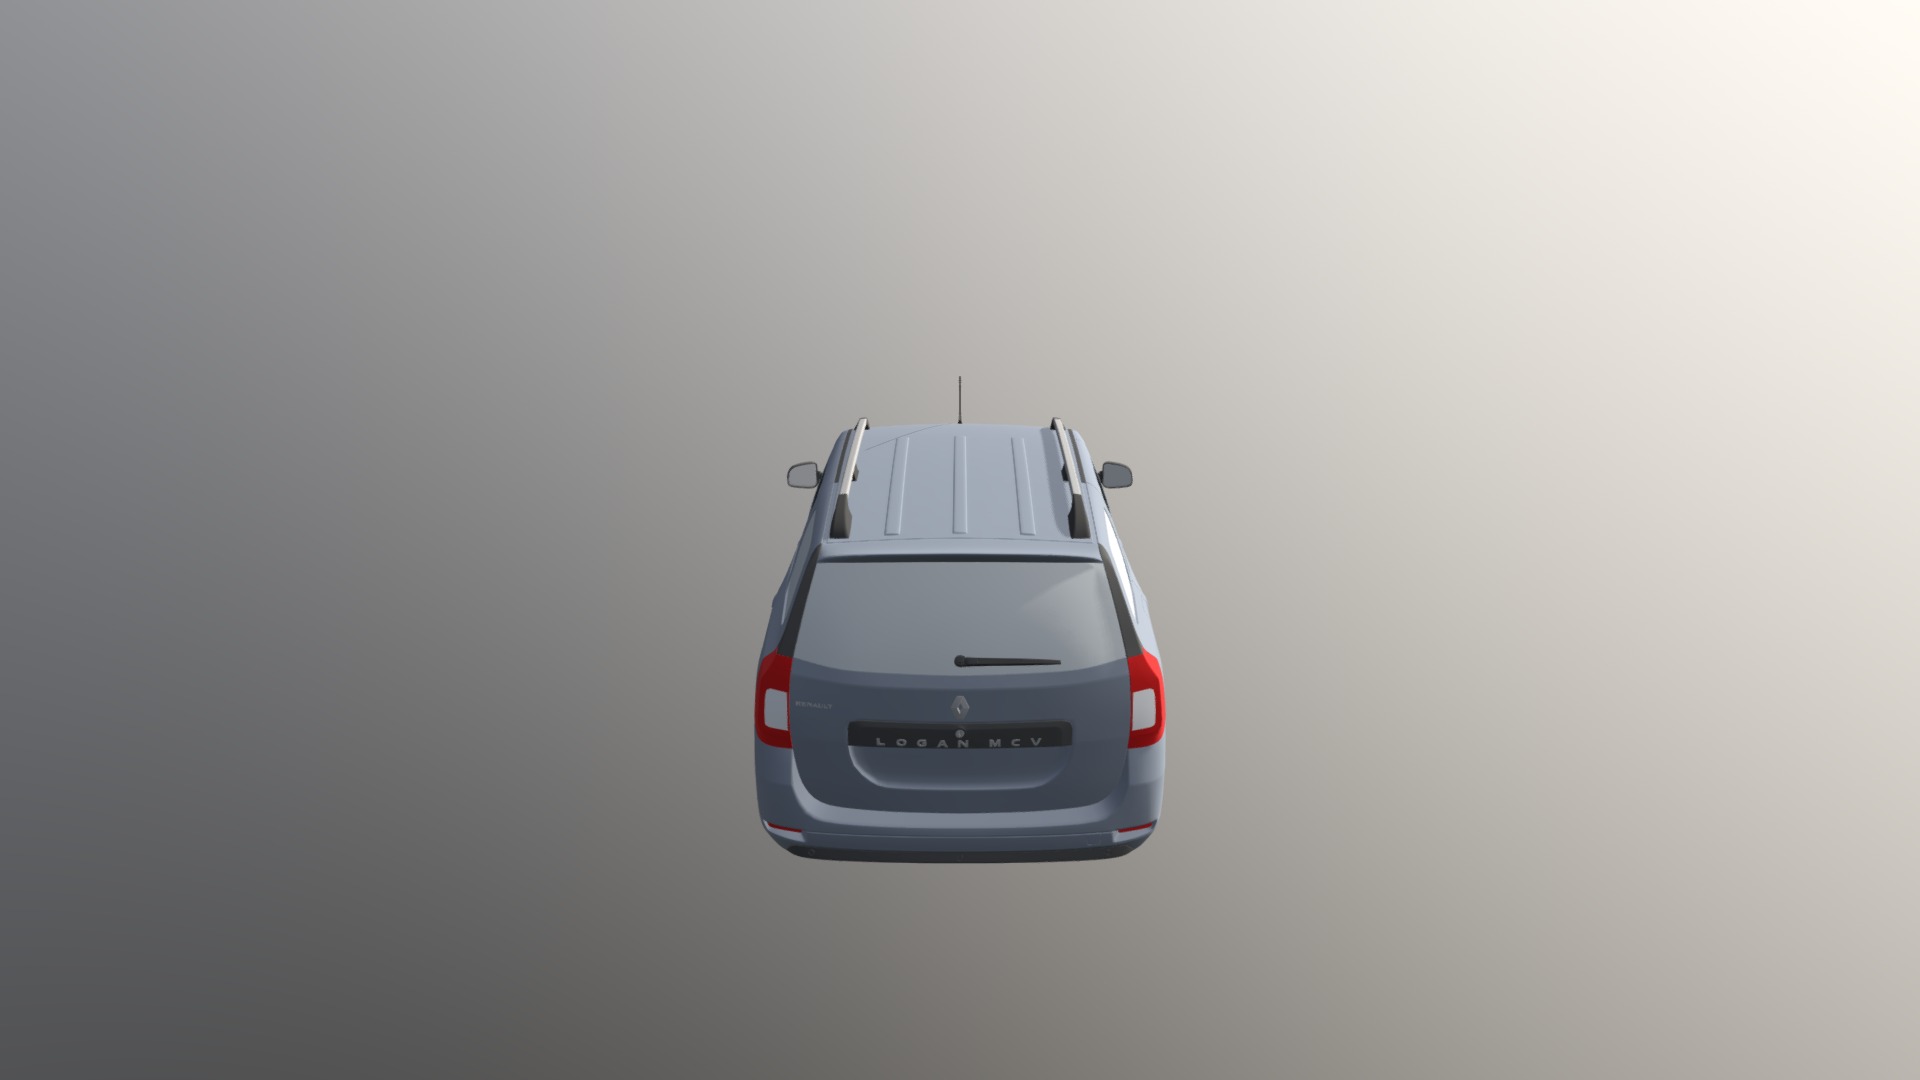 3D model Renault Logan MCV 2018 Fbx - This is a 3D model of the Renault Logan MCV 2018 Fbx. The 3D model is about a white car with a red stripe.